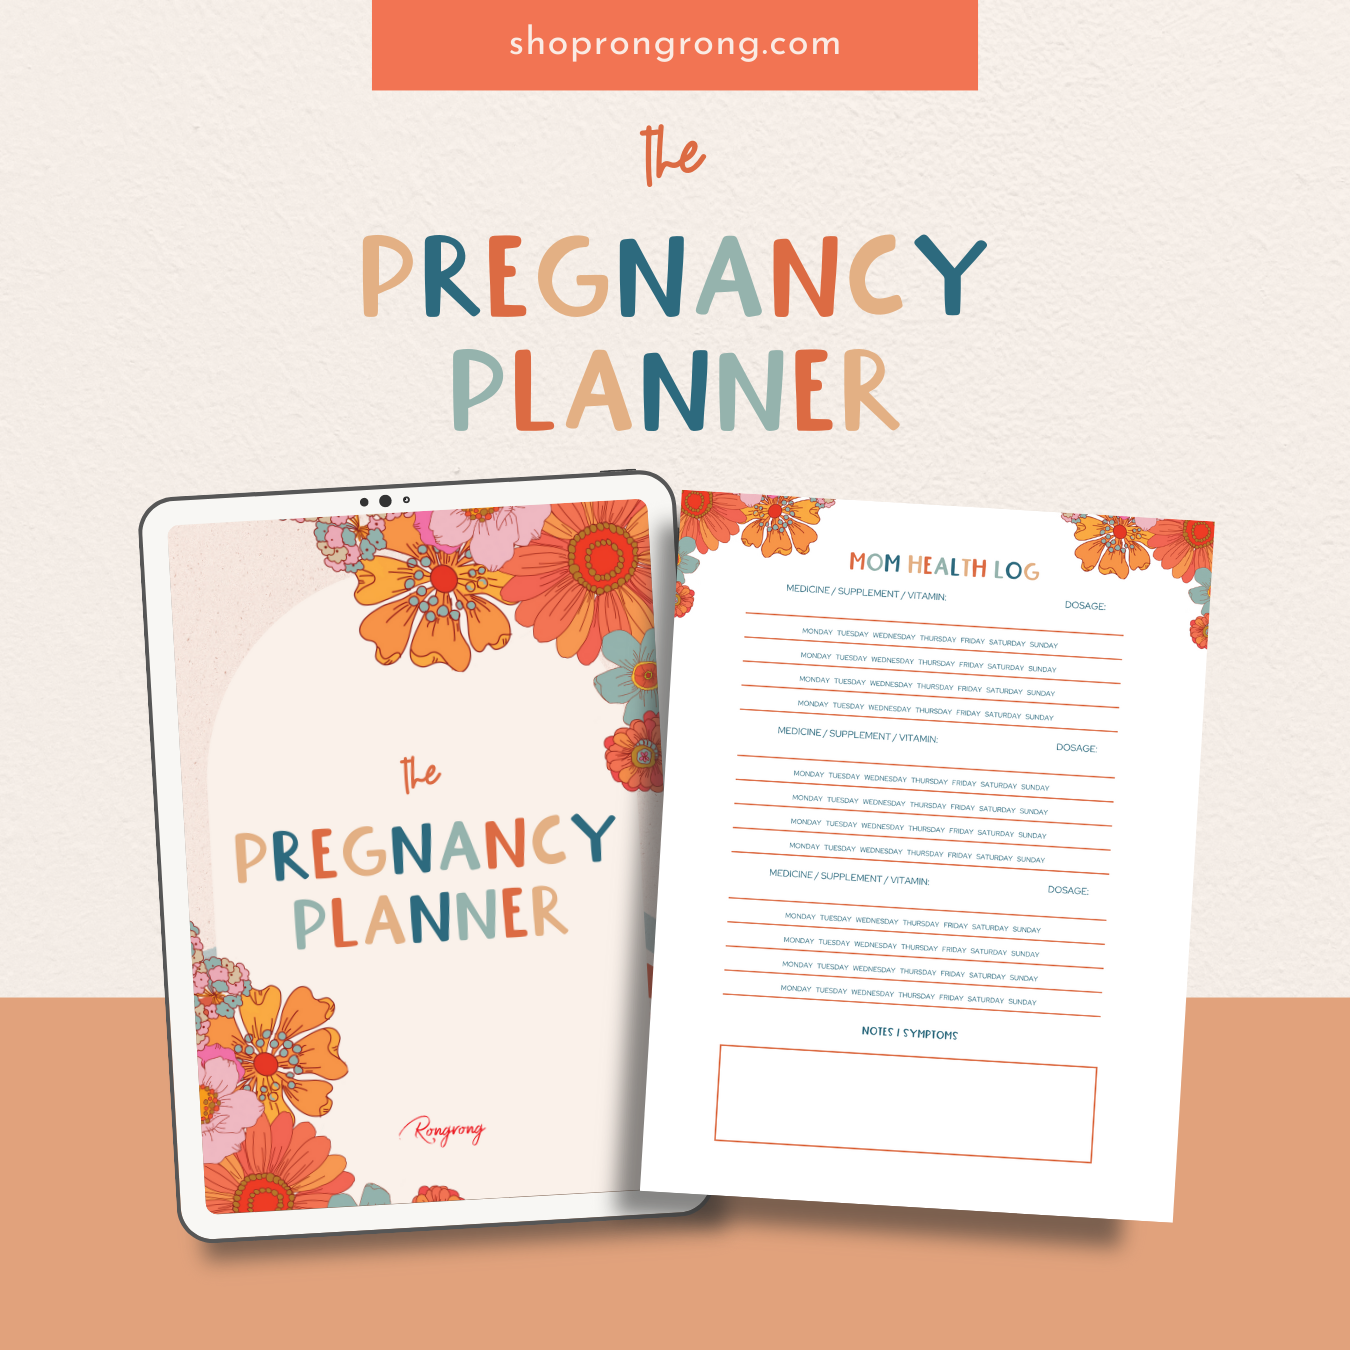 Shop Rongrong The Pregnancy Digital Planner  